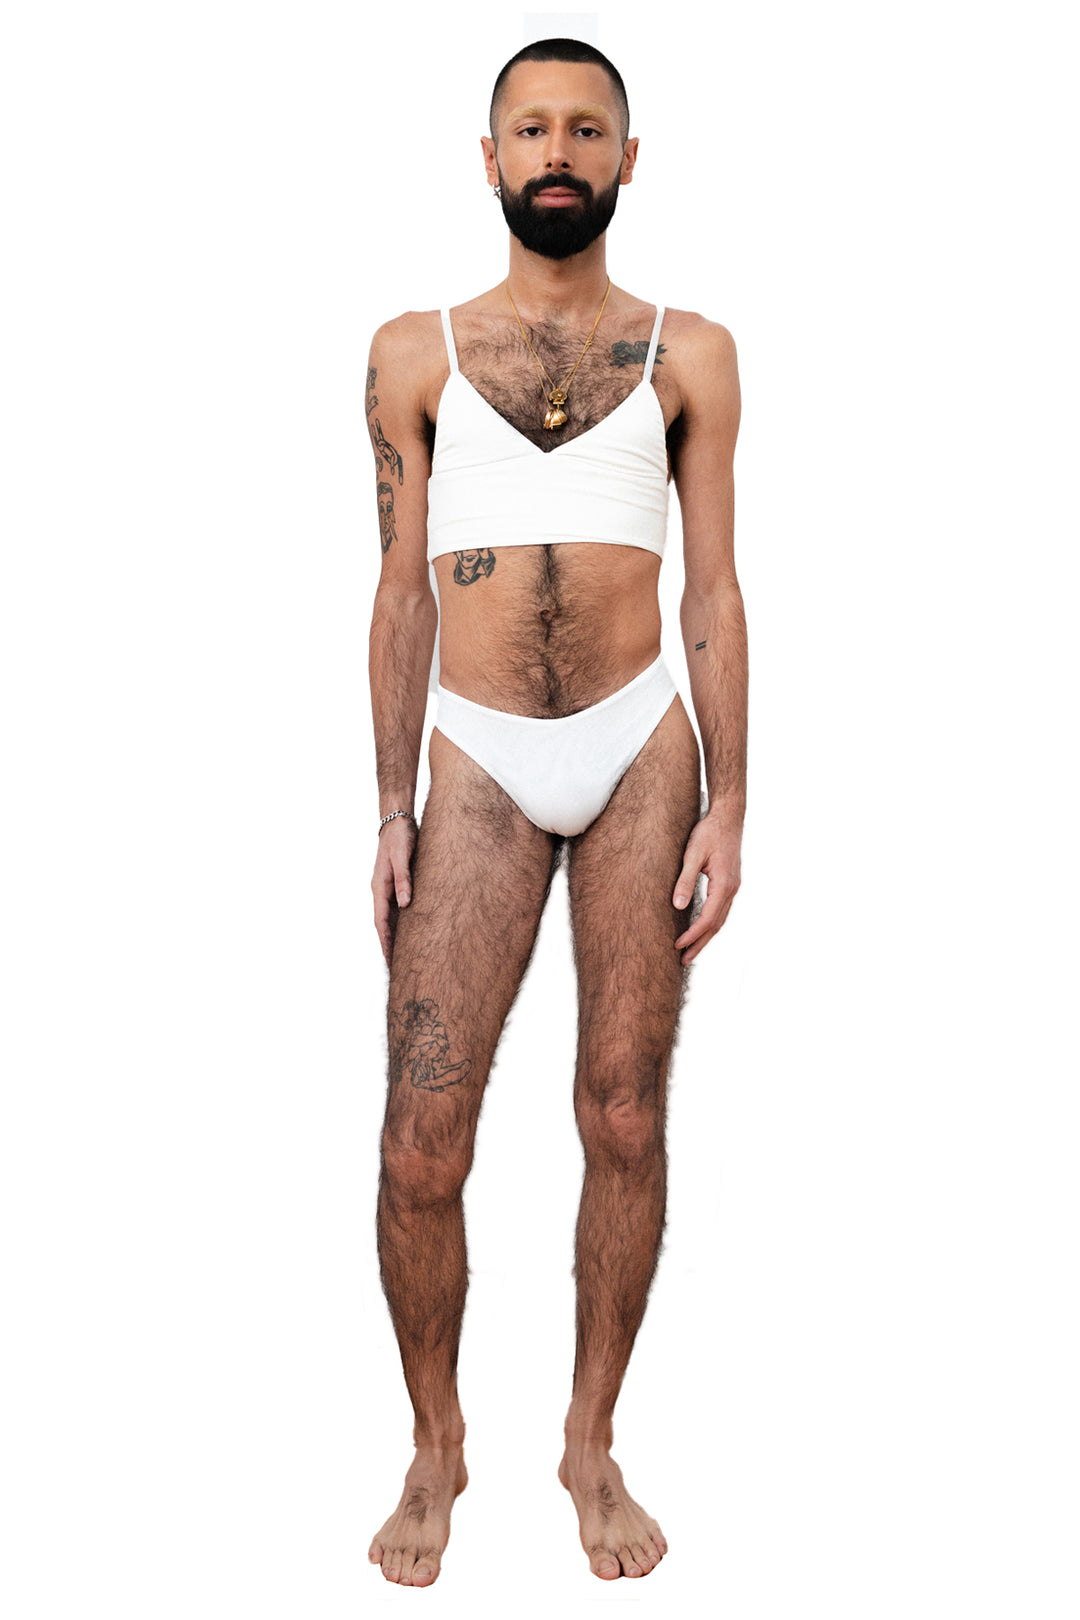 ENBY person wearing a white tucking underwear compression gaff with a cheeky cut and white bamboo bralette, photographed from the front.